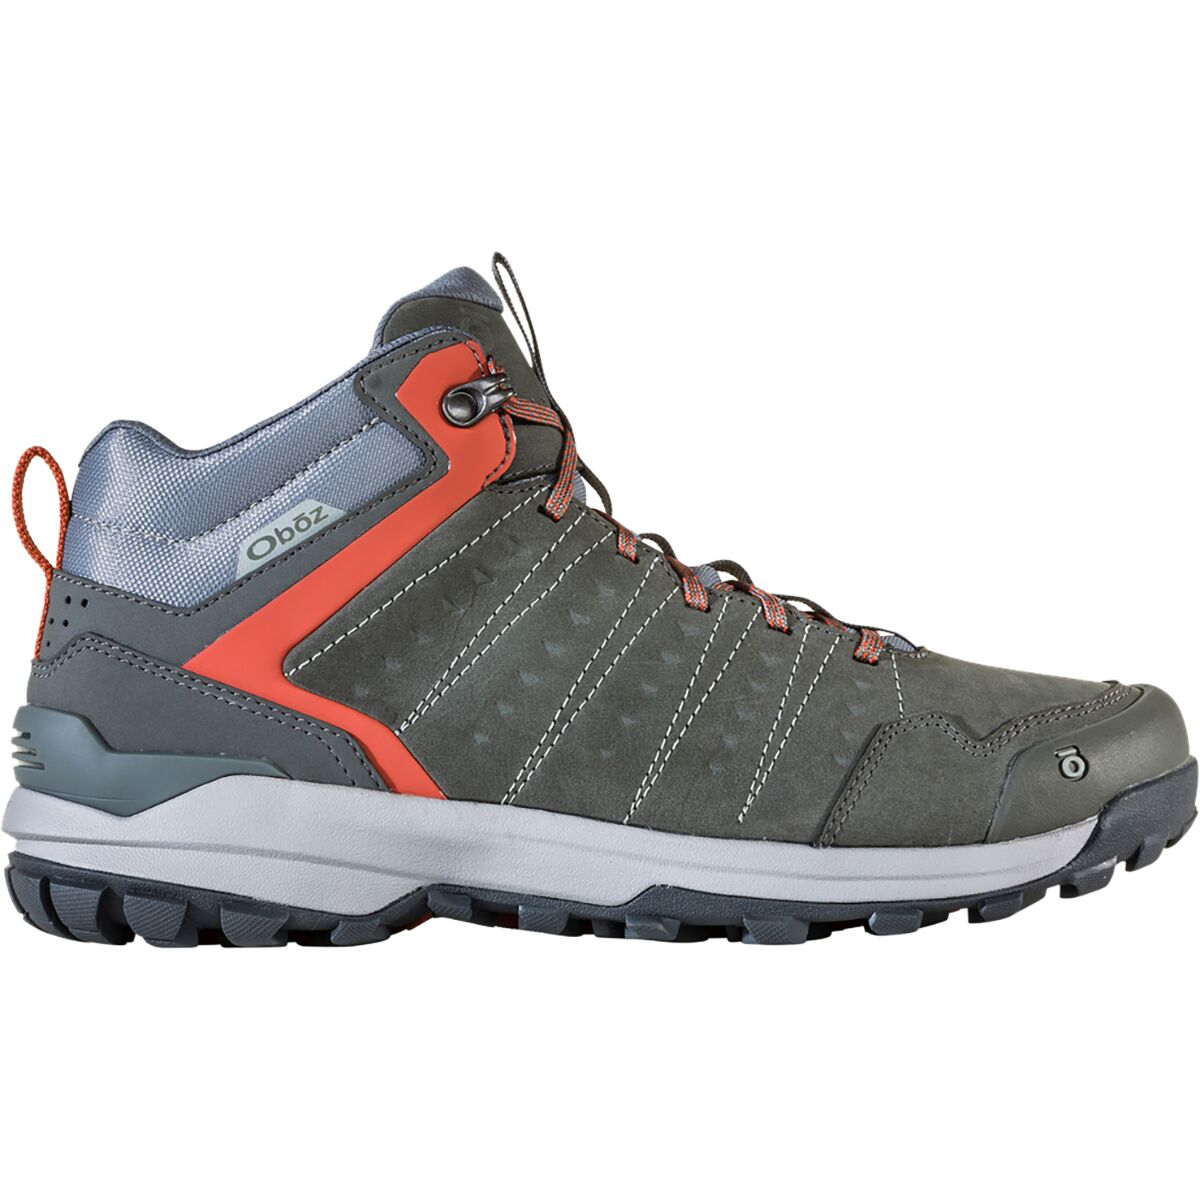 Oboz Sypes Mid Leather Waterproof Hiking Boot - Men's